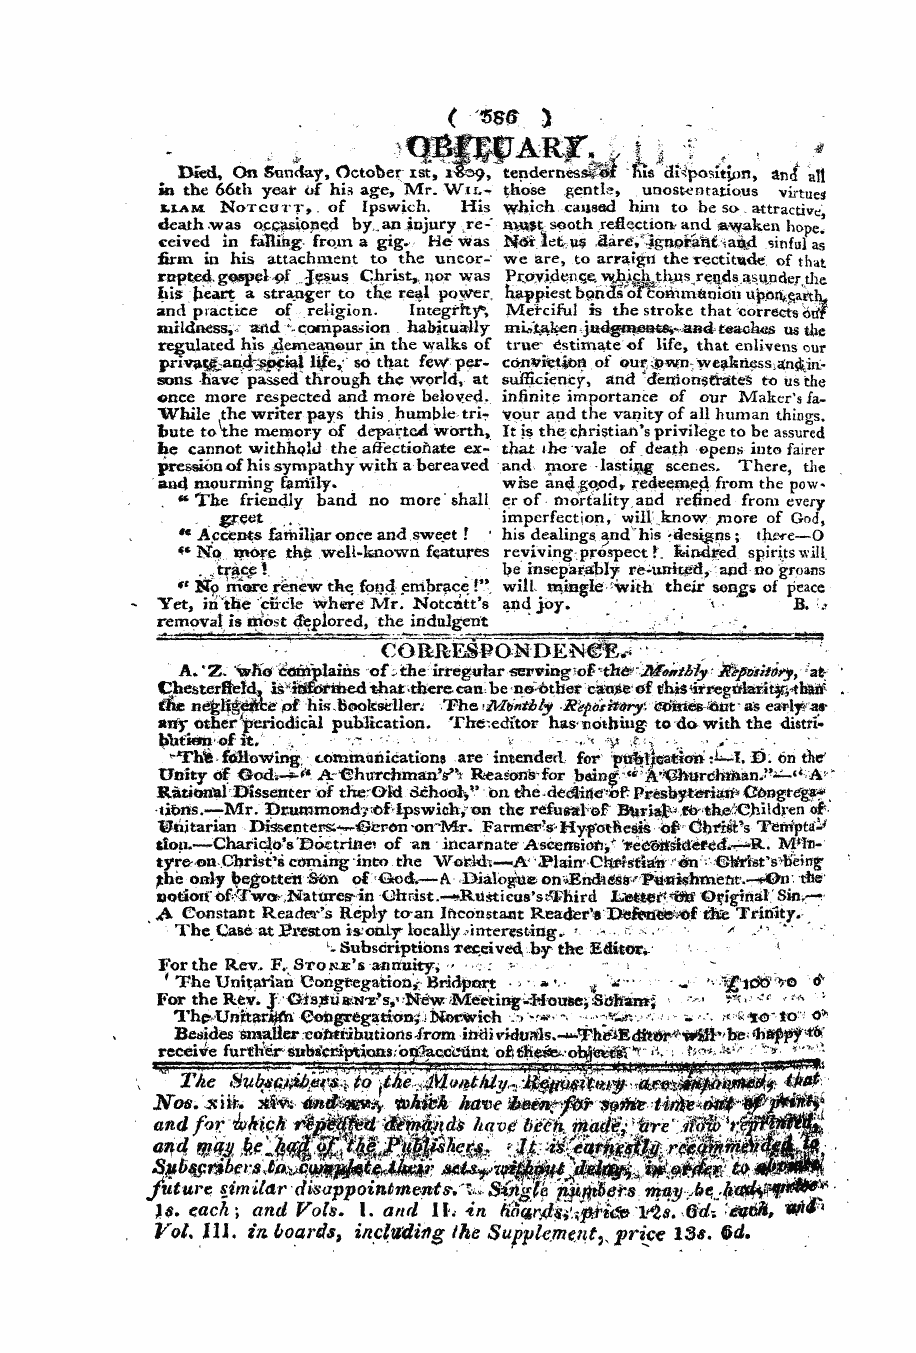 Monthly Repository (1806-1838) and Unitarian Chronicle (1832-1833): F Y, 1st edition: 56